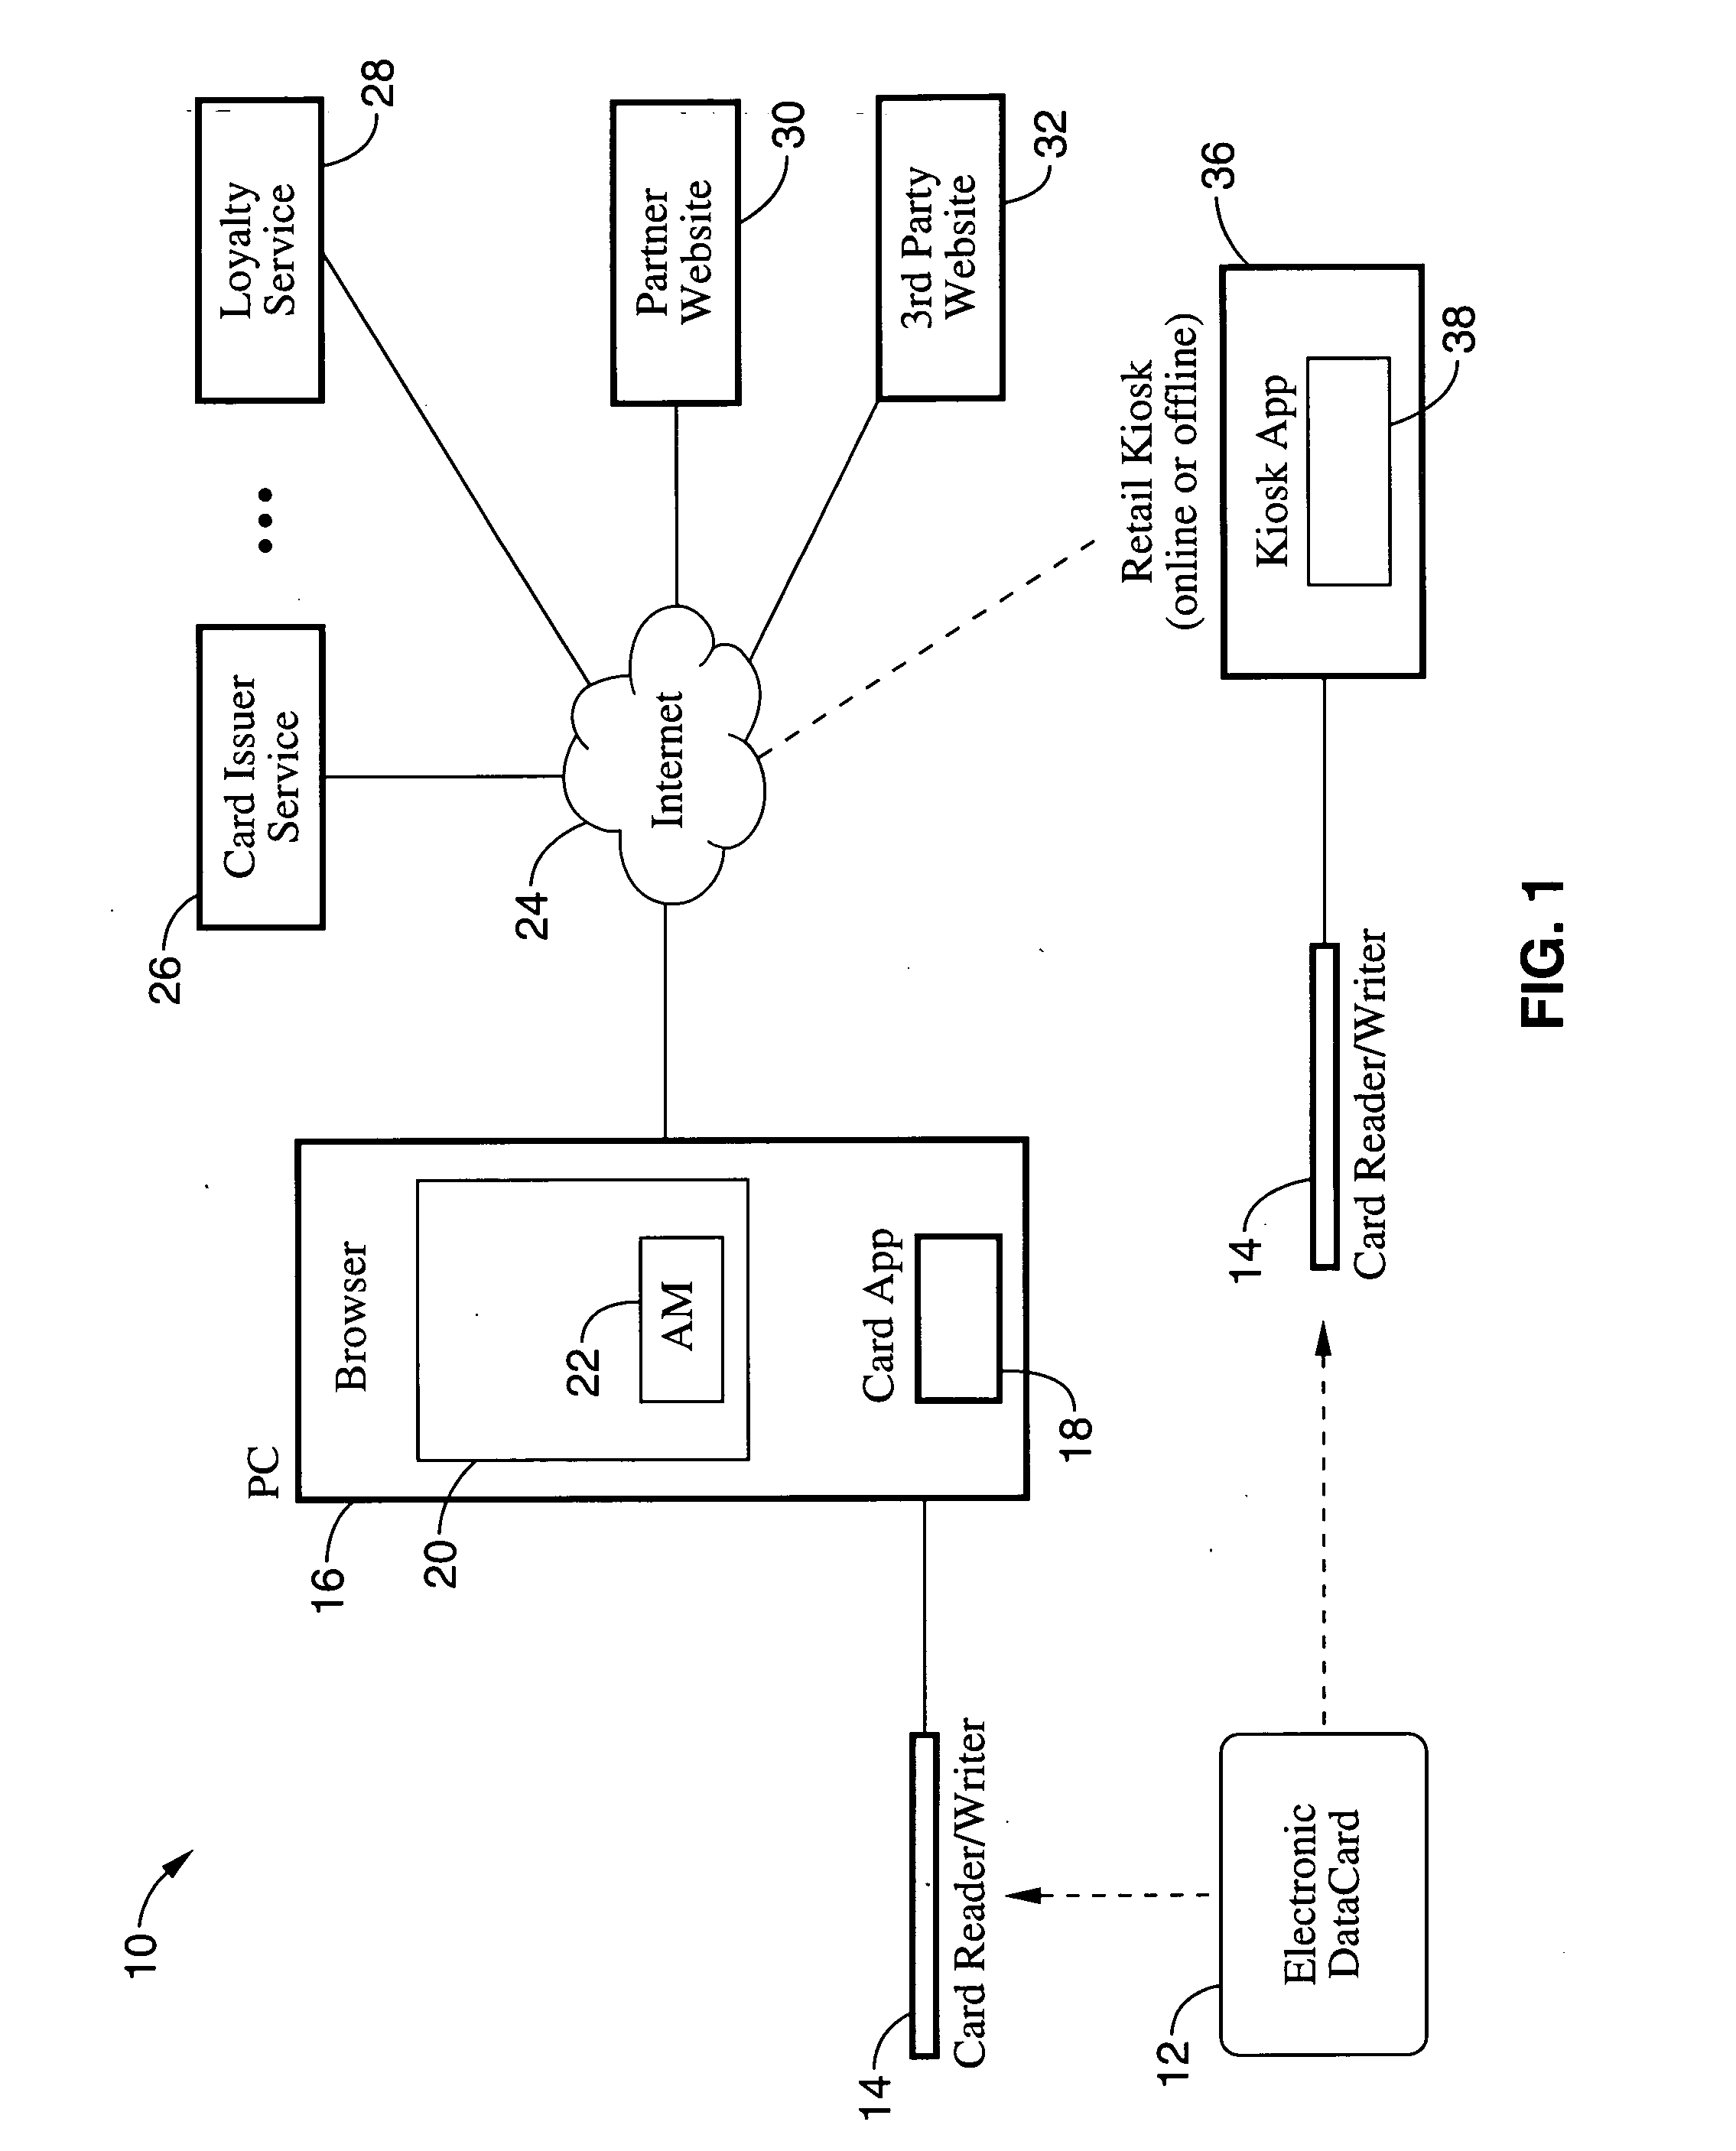 System and method for issuing and redeeming incentives on electronic data cards